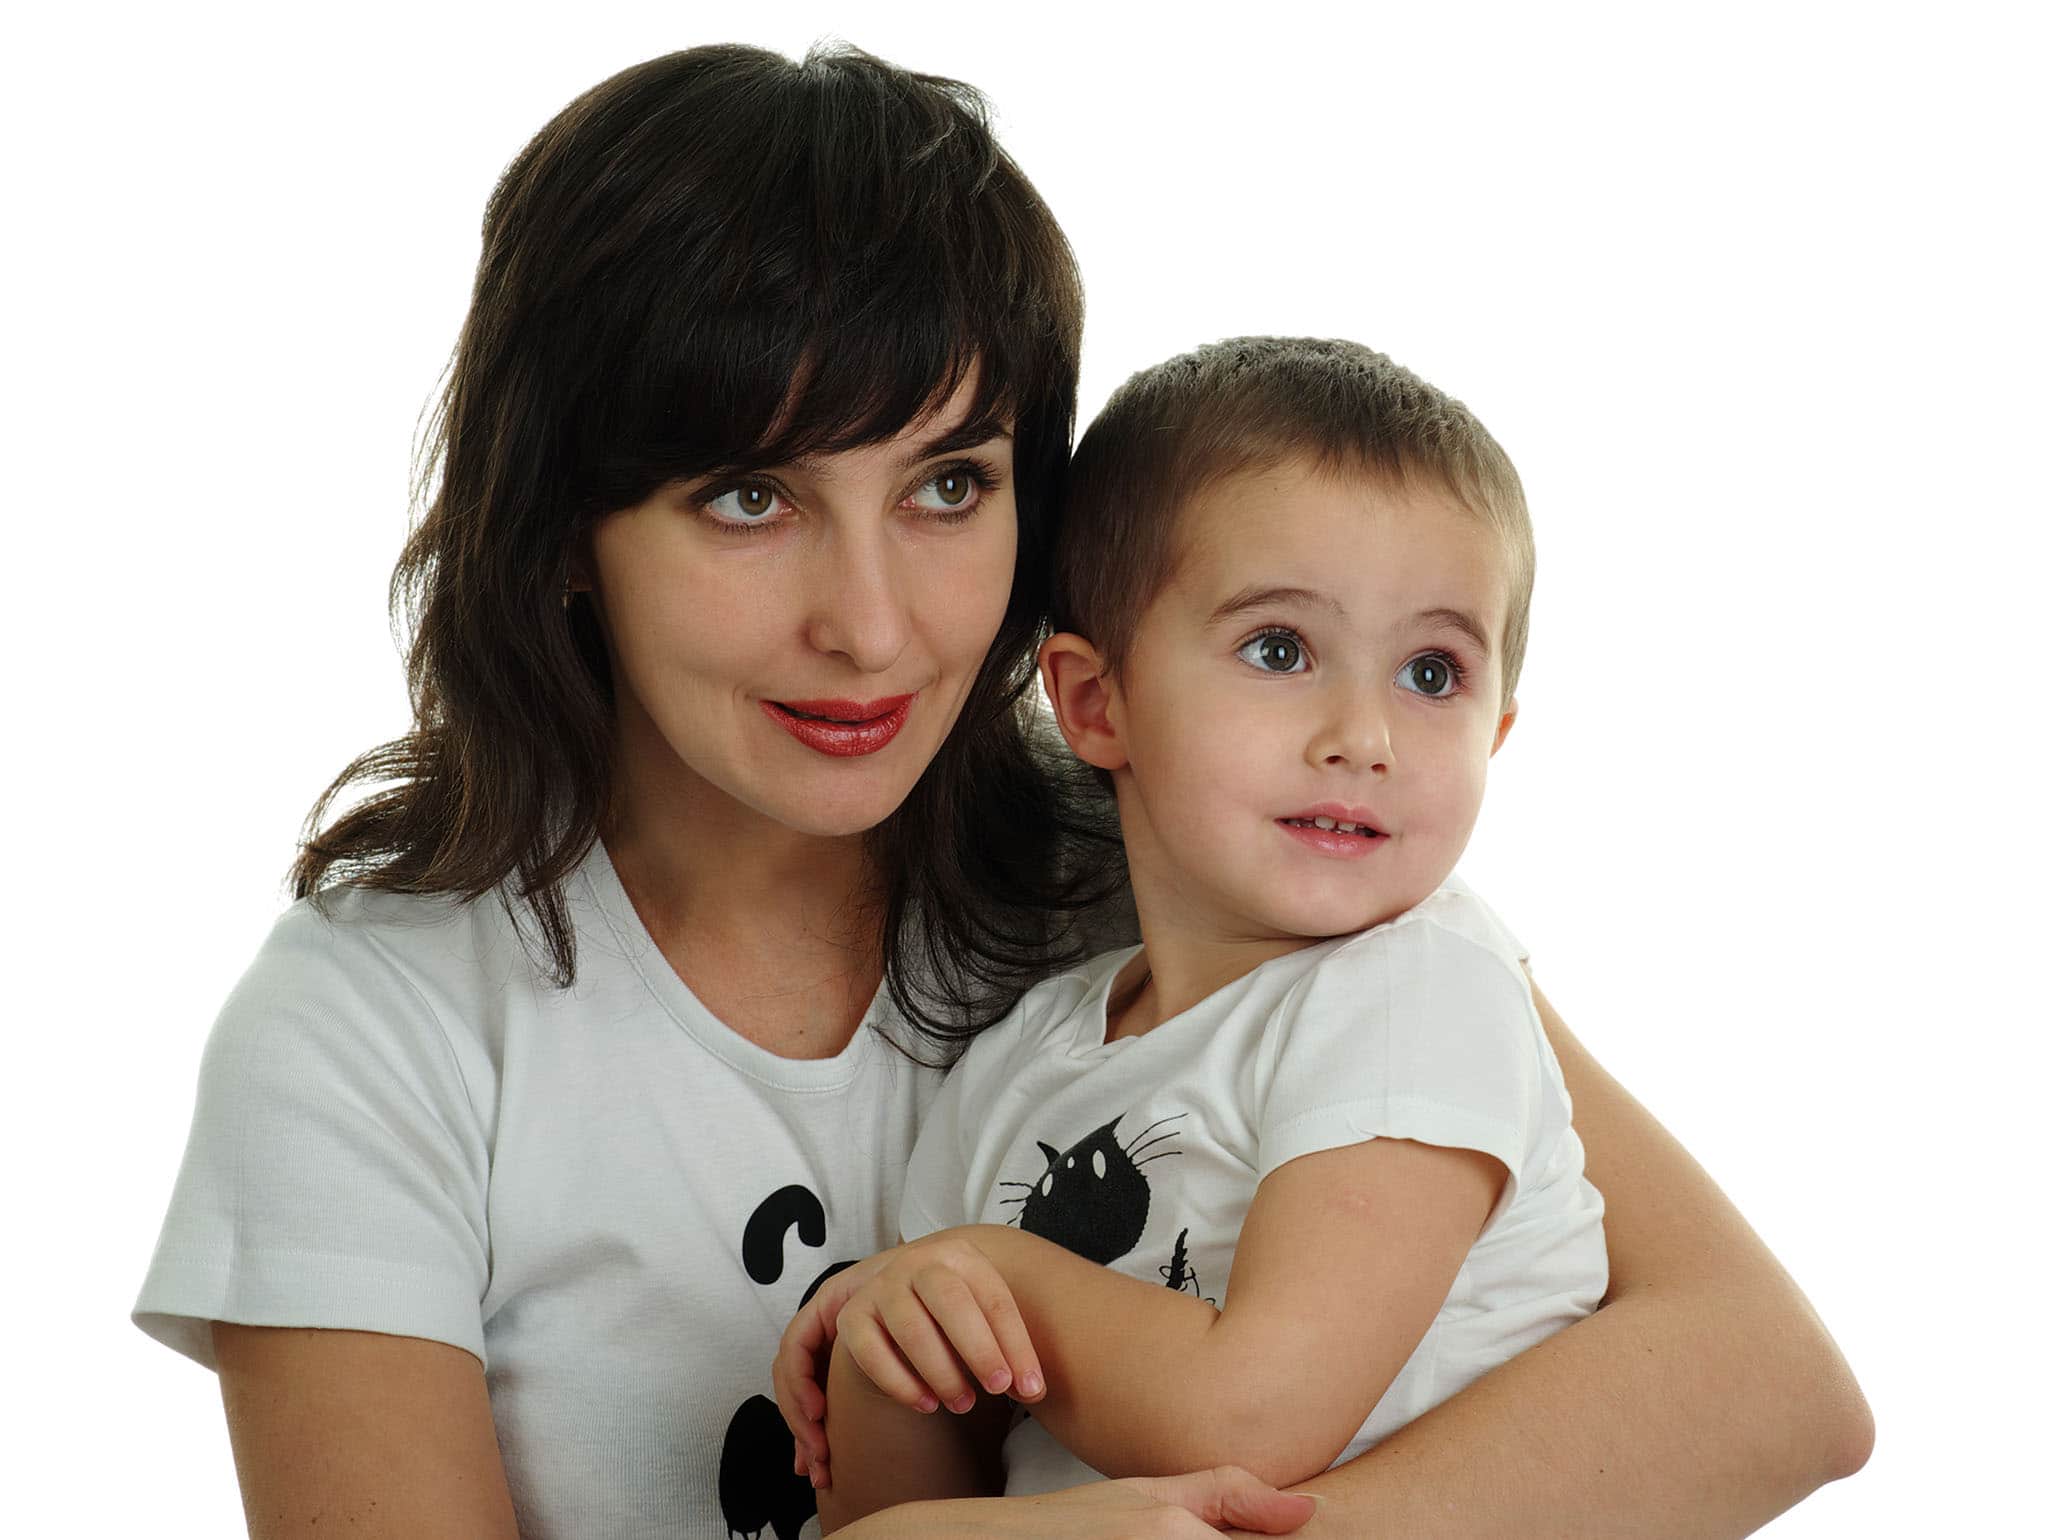 Graphic tees that show something both you and your son love is another way to create a 'mommy and me' look